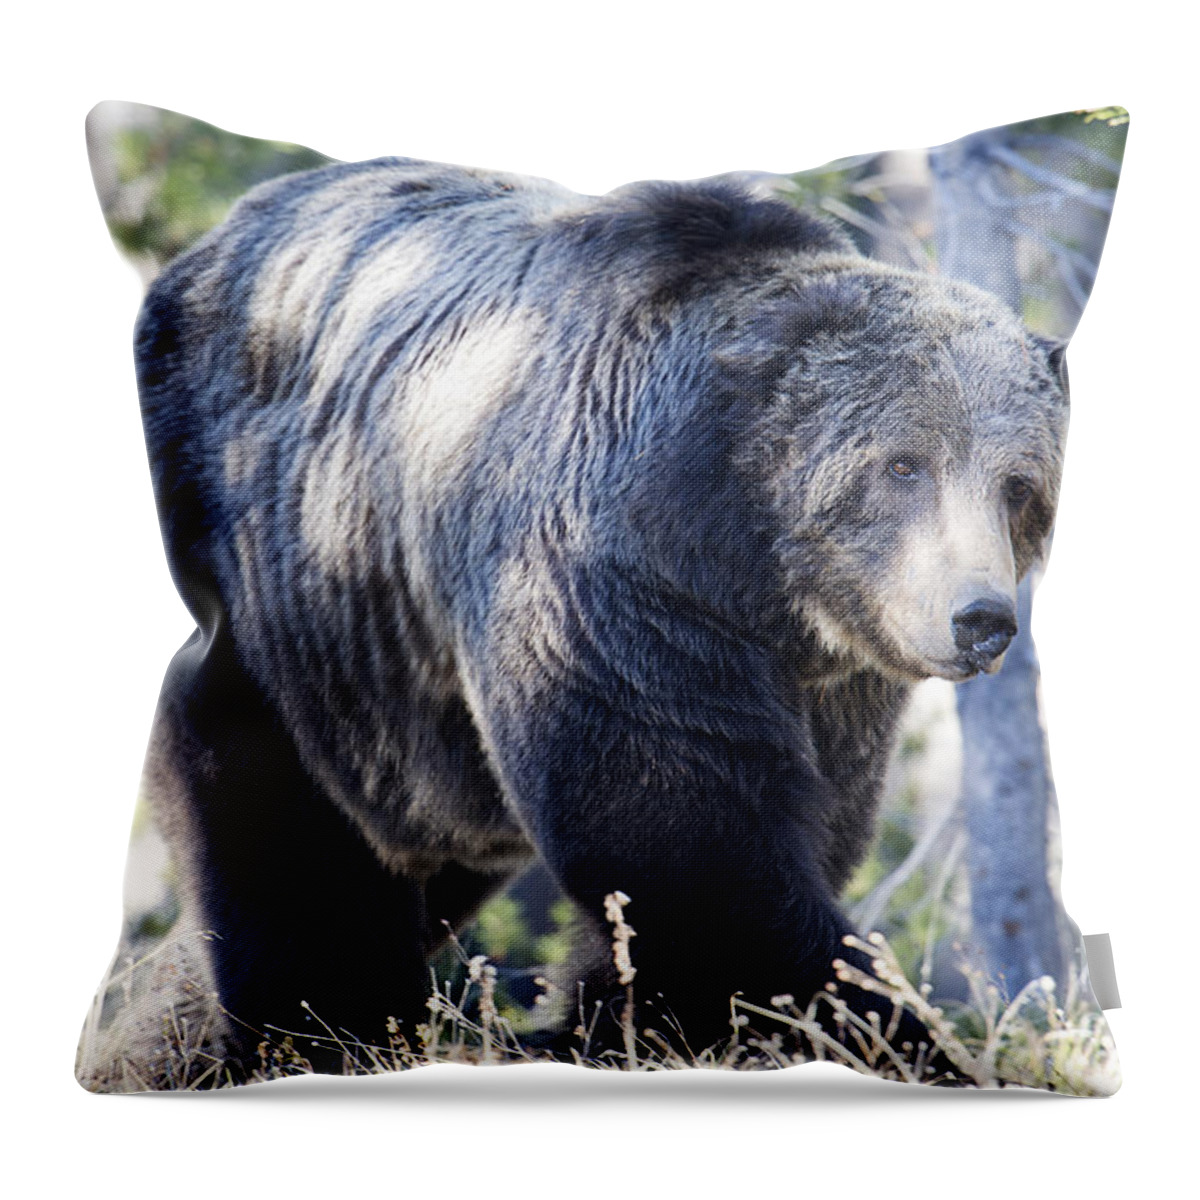 Grizzly Bear Throw Pillow featuring the photograph Scarface by Deby Dixon